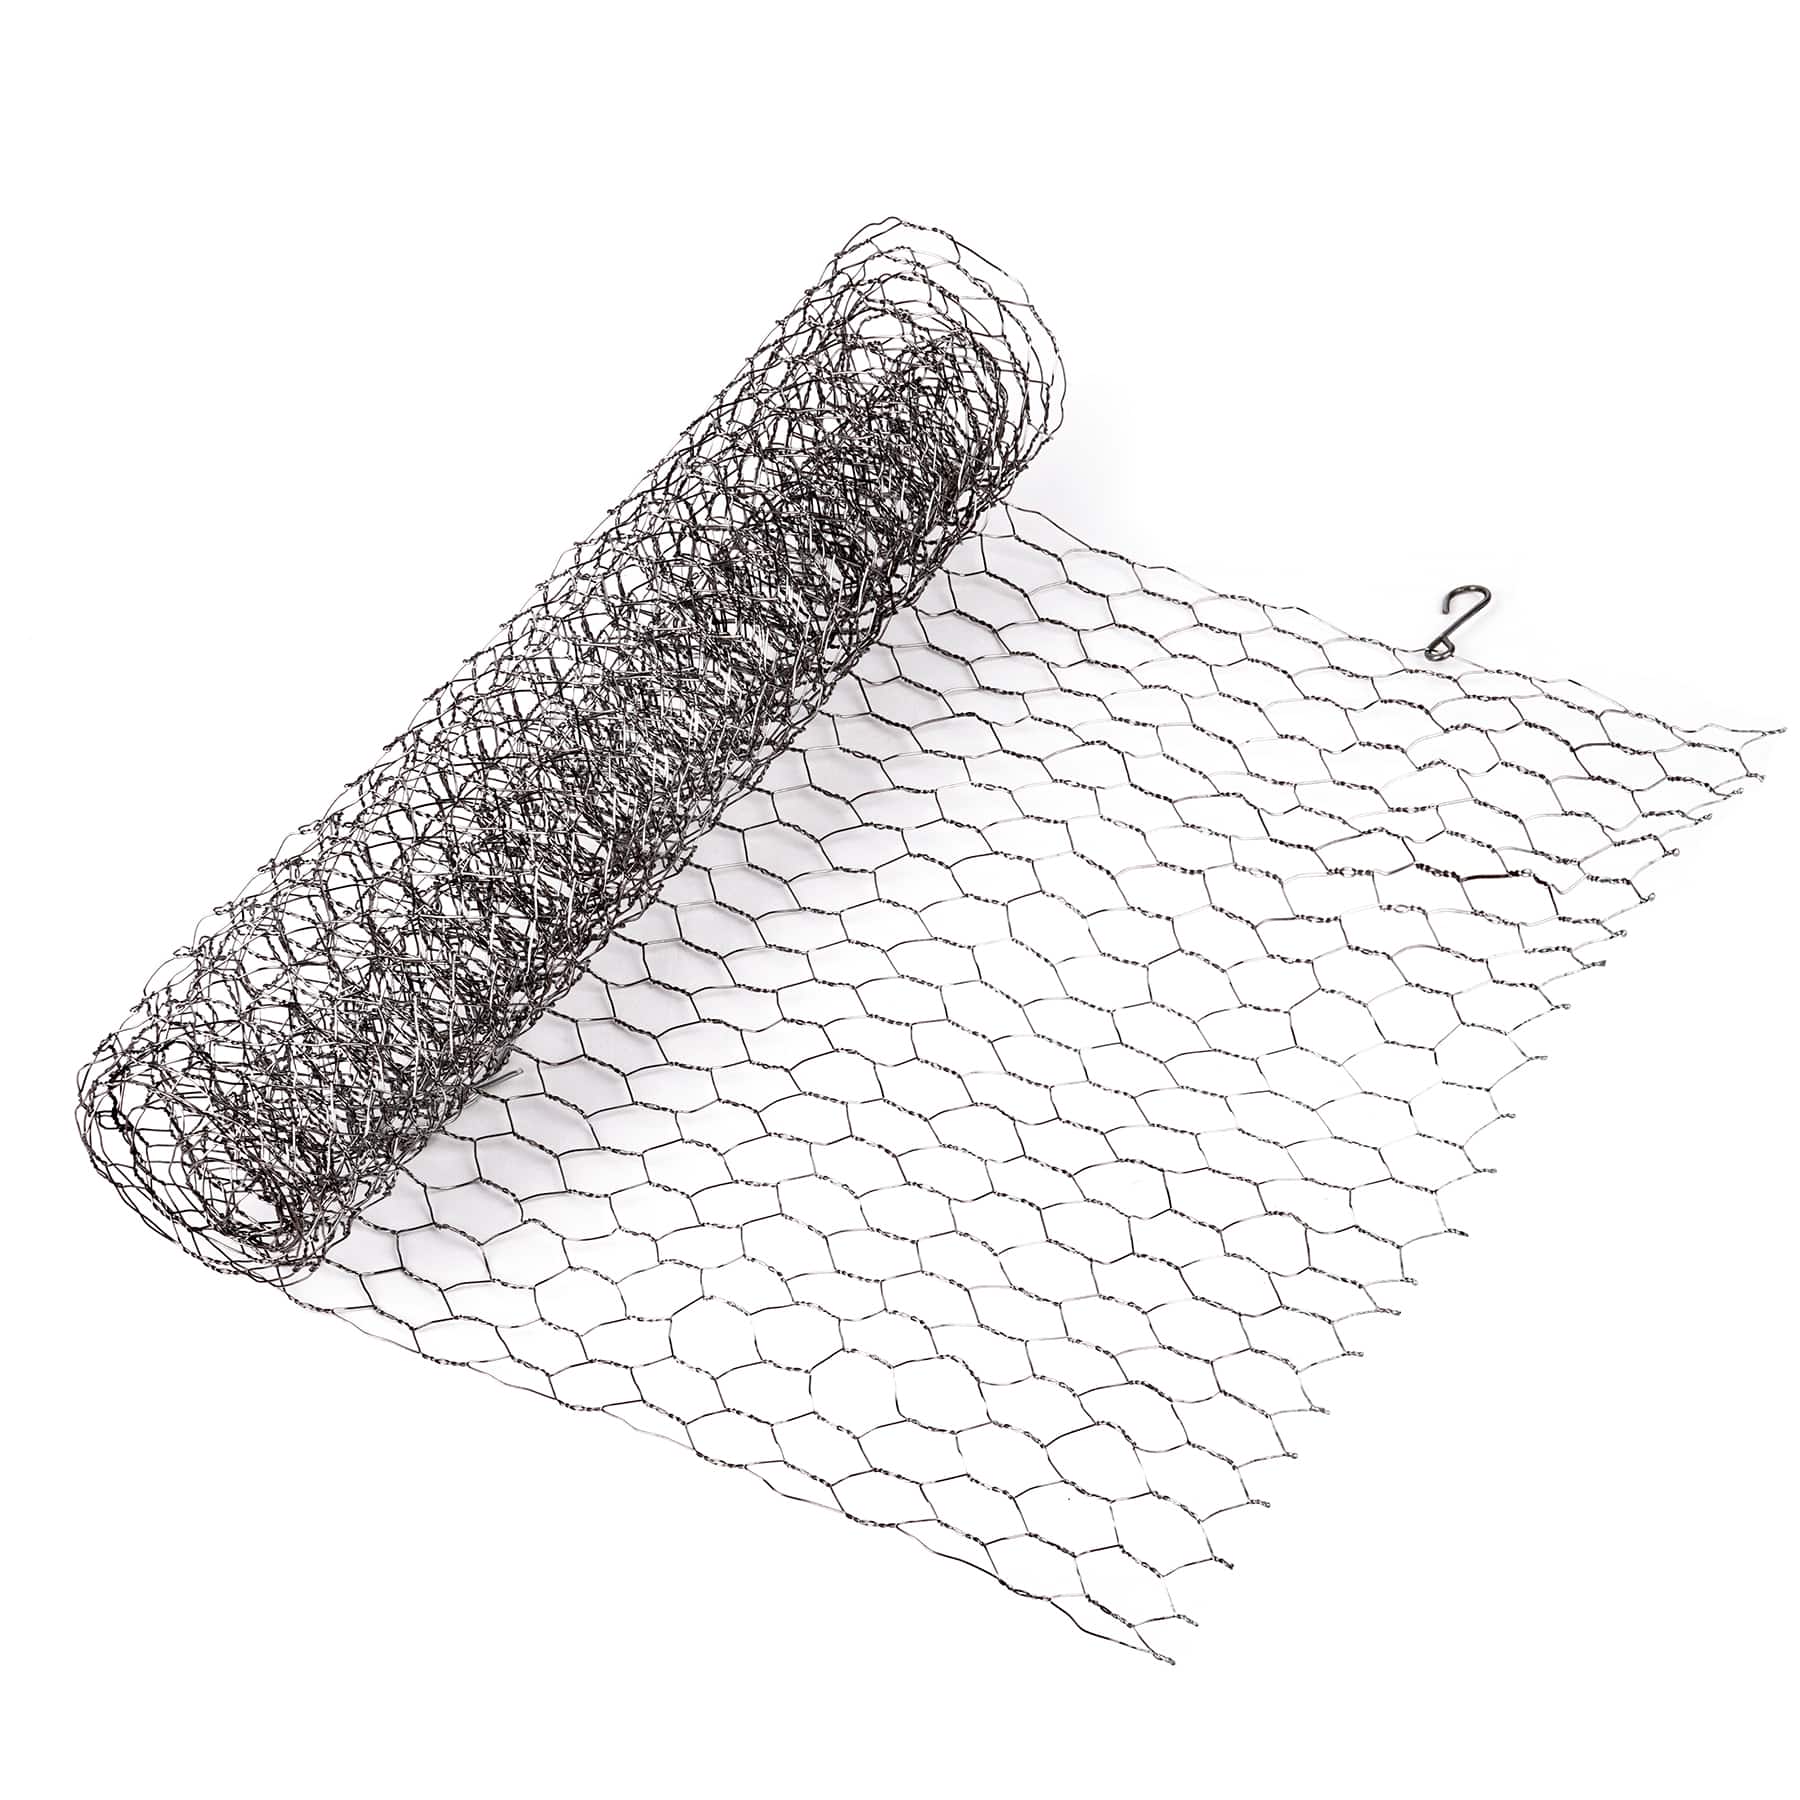 Shop for the Galvanized Chicken Wire By Ashland™ at Michaels